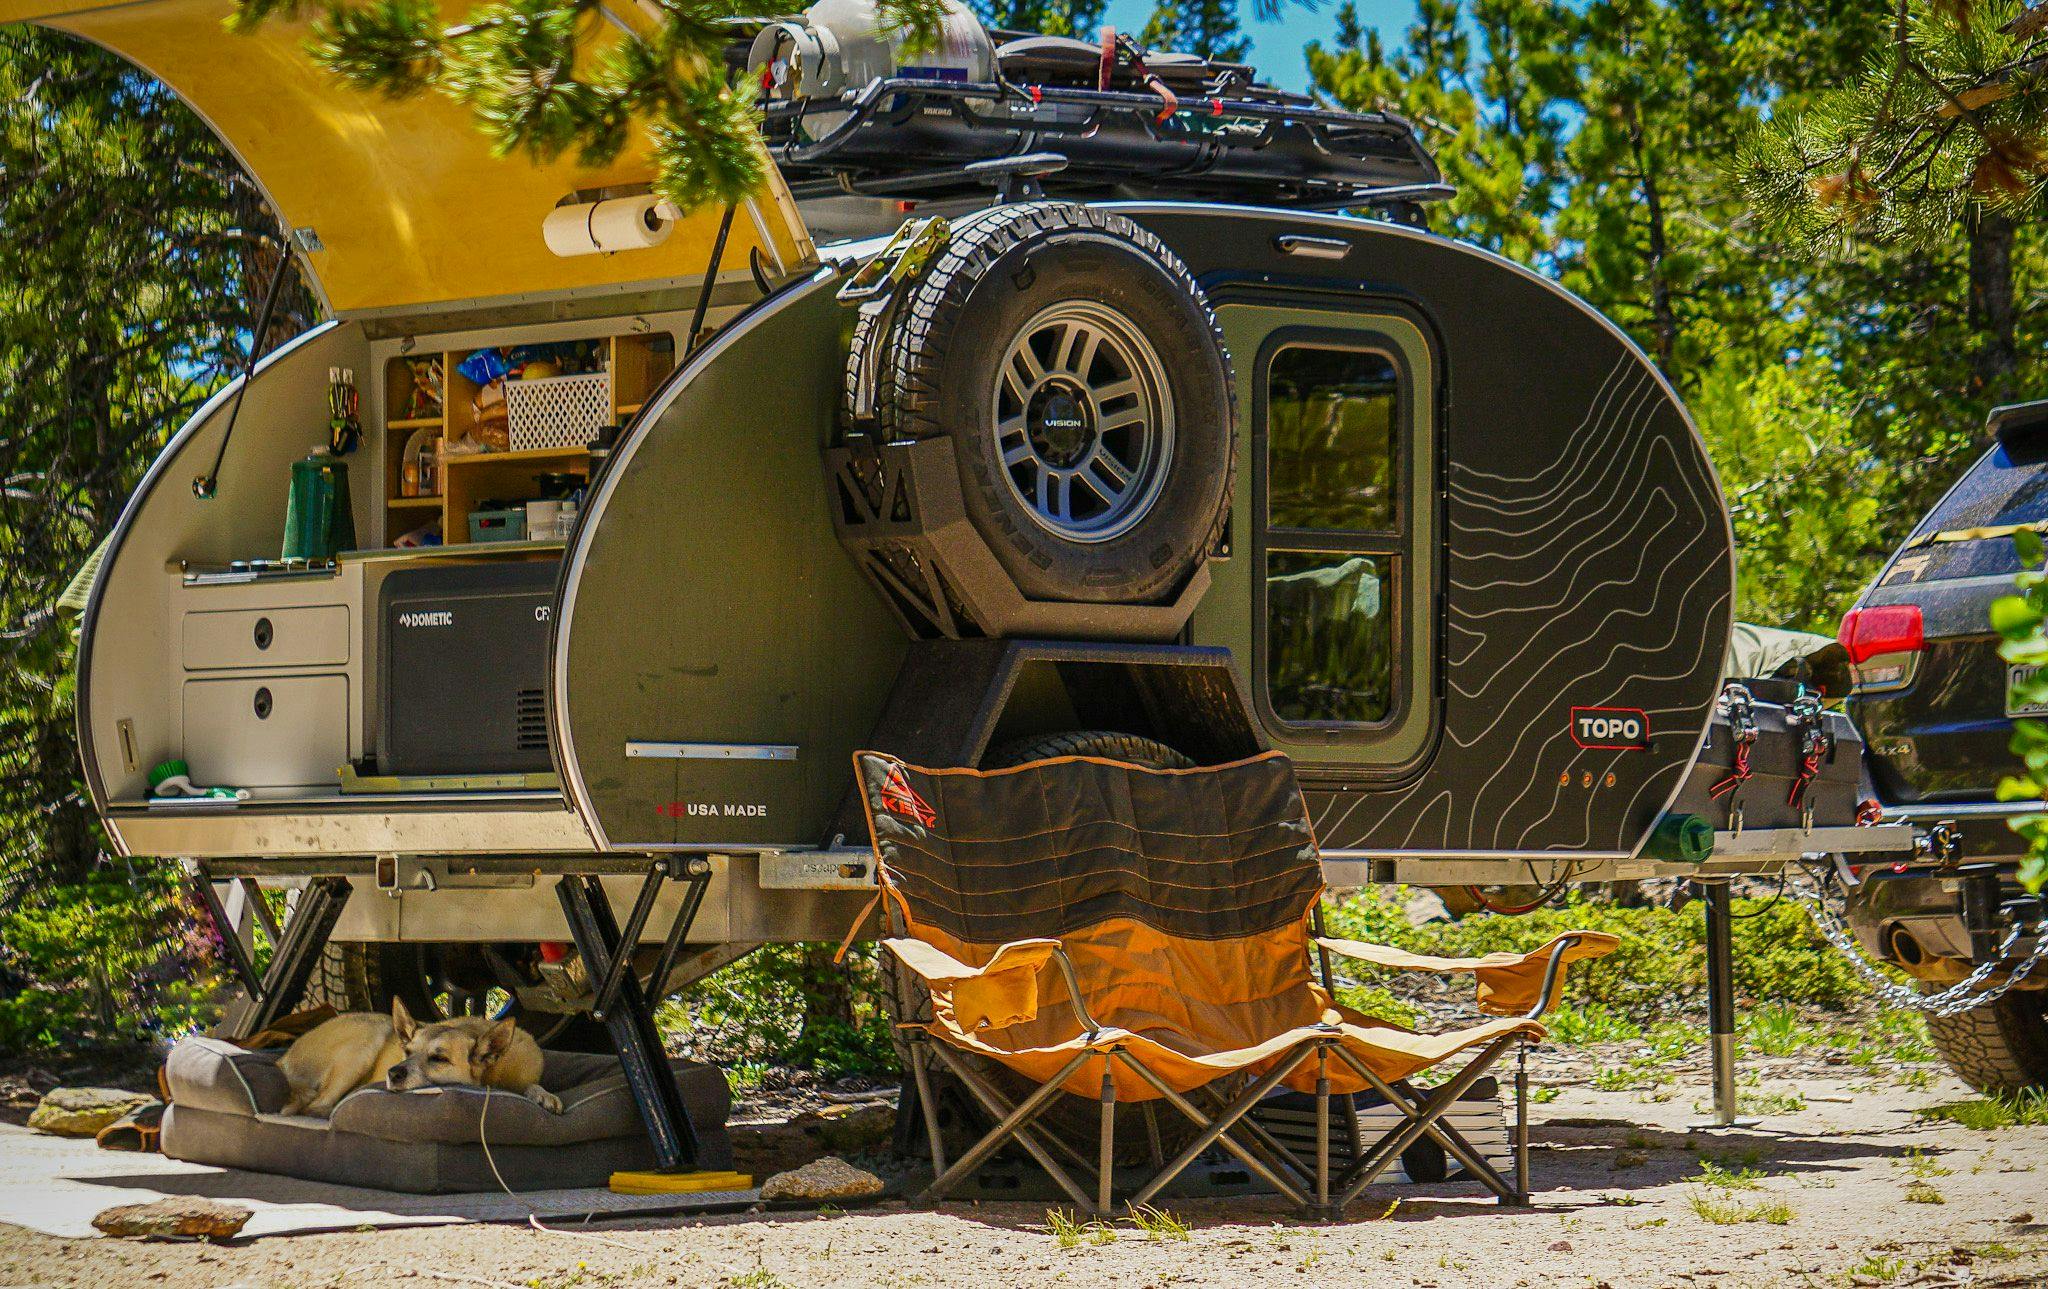 A picture of an Original TOPO, an offroad trailer set up at camp.